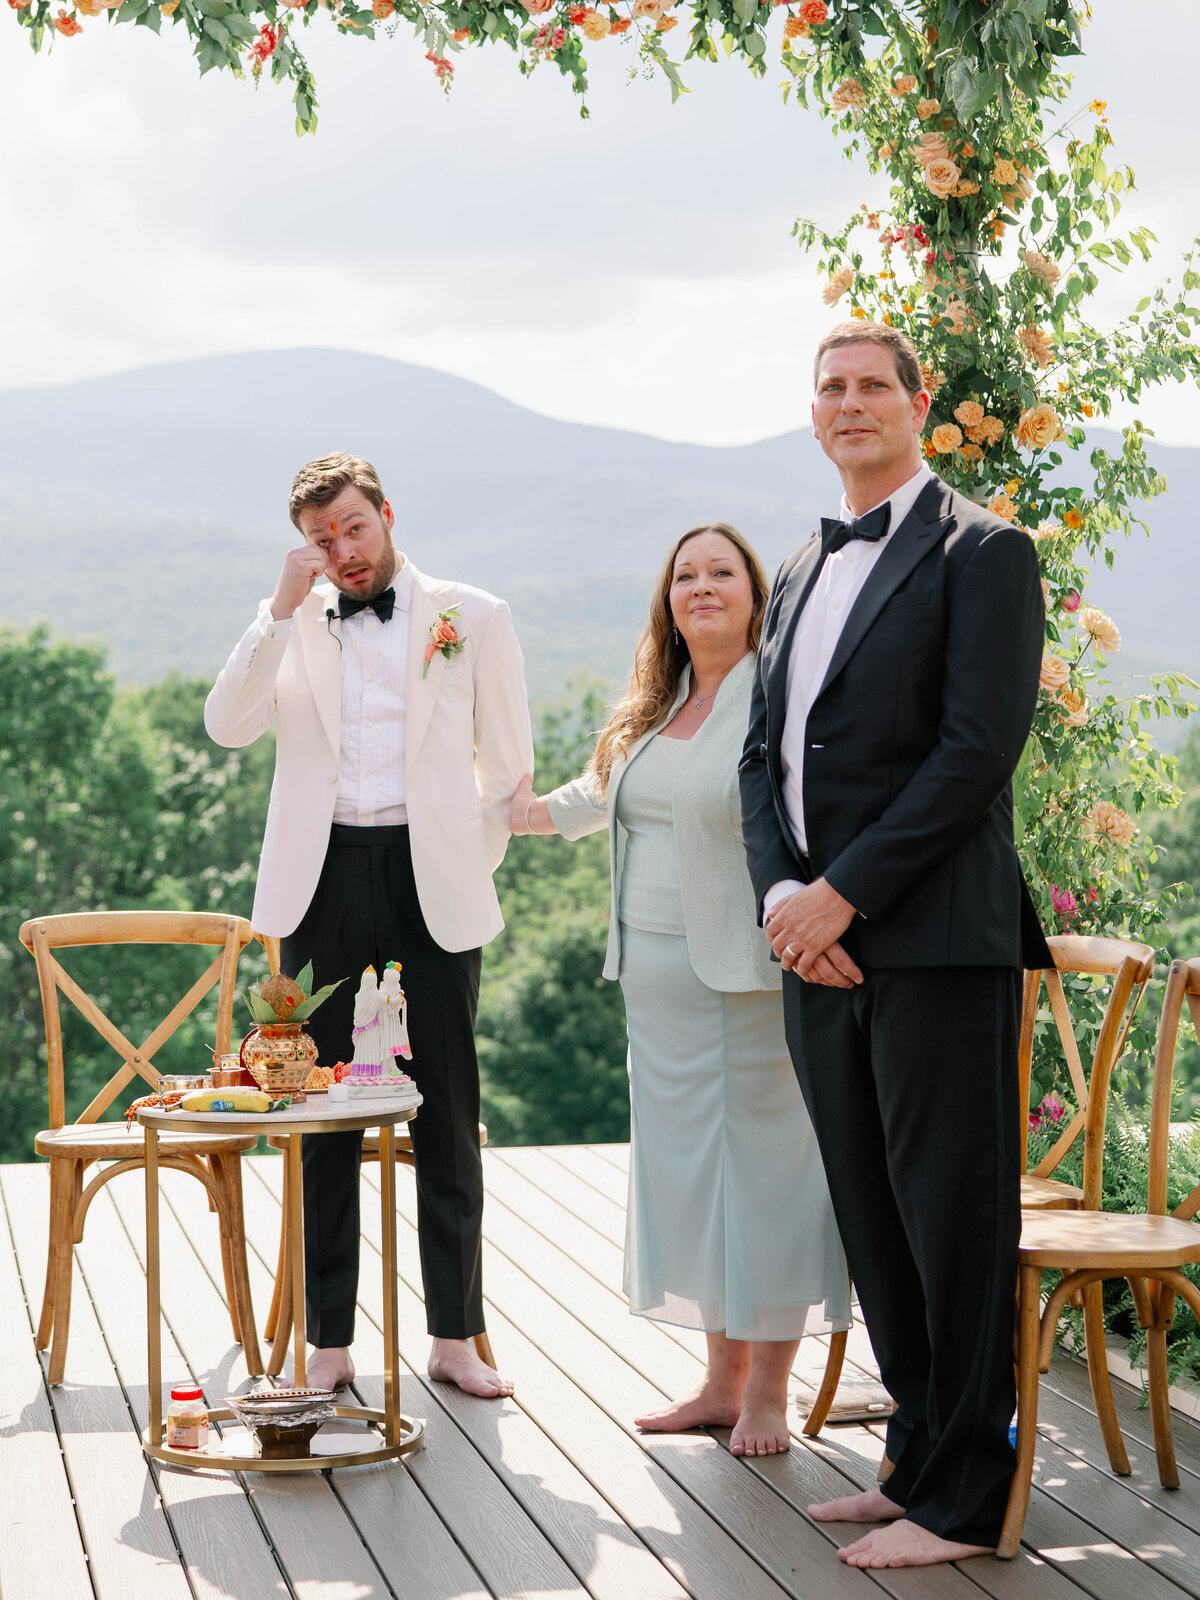 Liz Andolina Photography Destination Wedding Photographer in Italy, New York, Across the East Coast Editorial, heritage-quality images for stylish couples-752